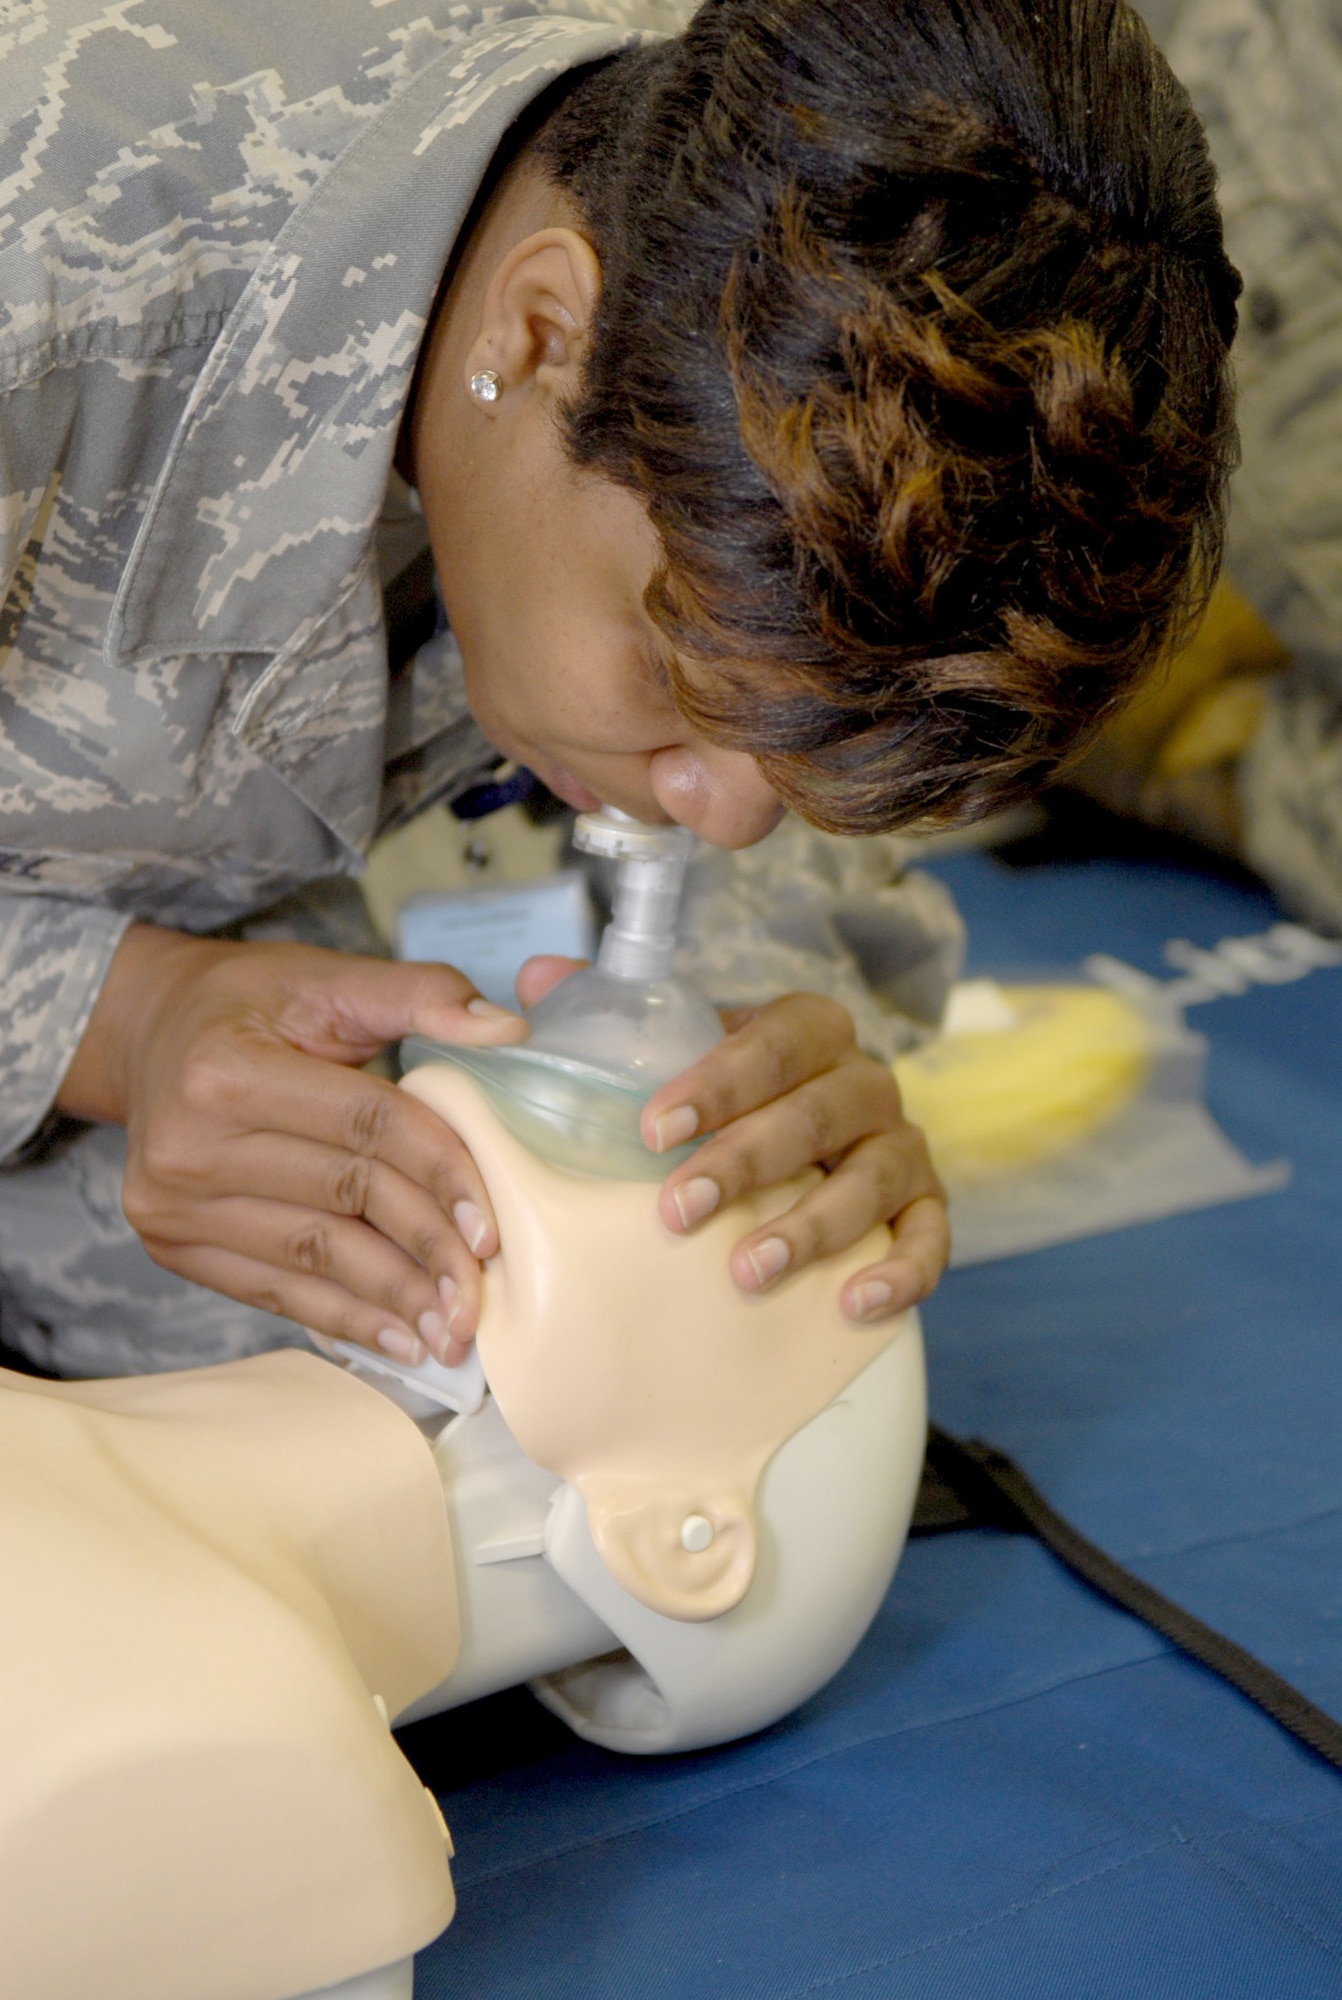 Tech. Sgt. Nicole Caldwell practices giving breaths to a CPR dummy April 15, 2011, during a Heartsaver class at Kadena Air Base, Japan. The American Heart Association has updated the CPR technique with the more effective method of administering immediate chest compressions. (U.S. Air Force photo/Airman 1st Class Tara A. Williamson)